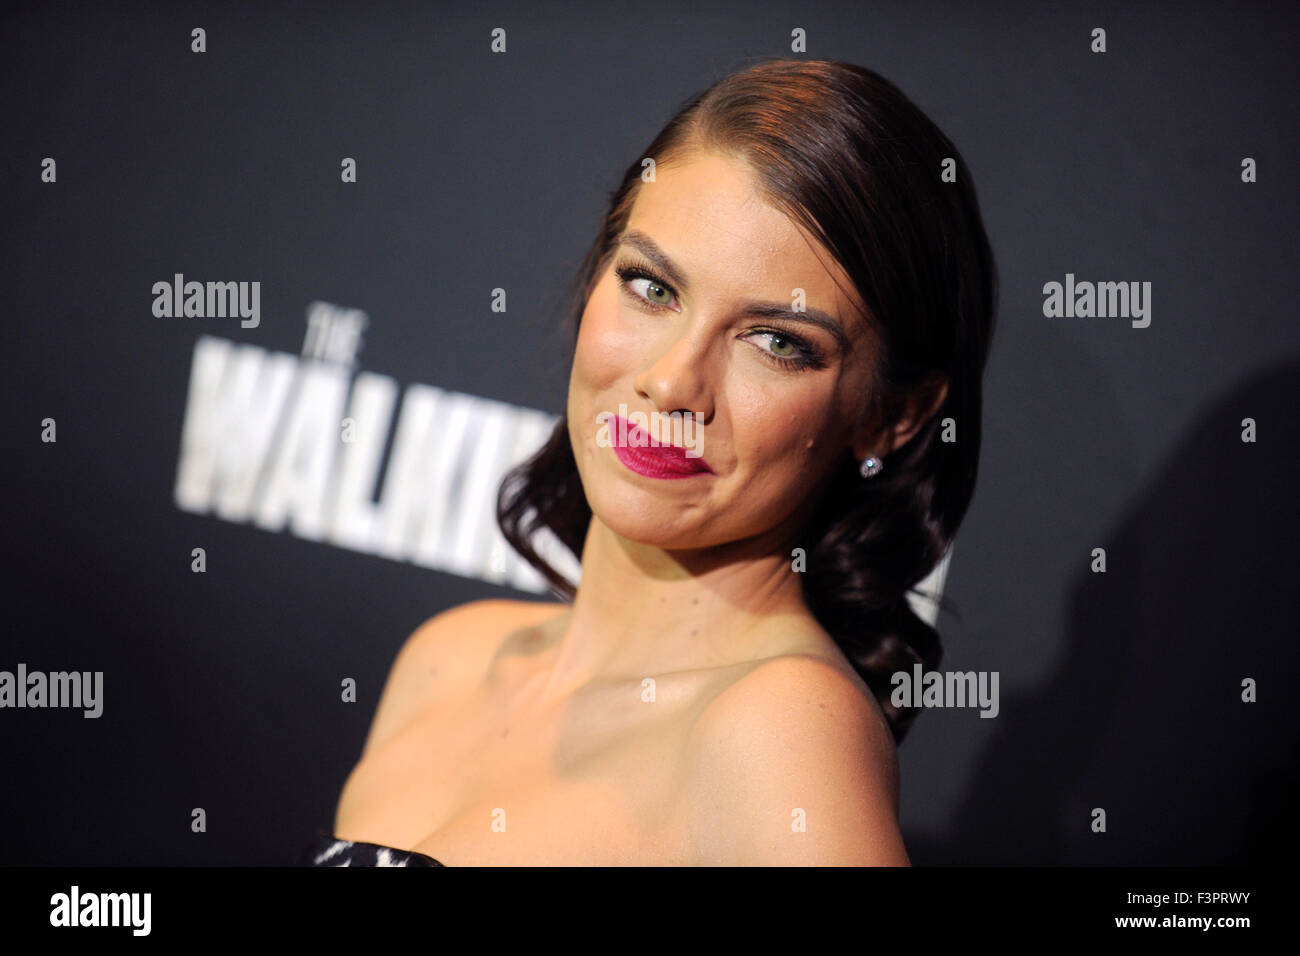 New York City. 9th Oct, 2015. Lauren Cohan attends AMC's 'The Walking Dead' Season 6 Fan Premiere Event 2015 at Madison Square Garden on October 9, 2015 in New York City. © dpa/Alamy Live News Stock Photo